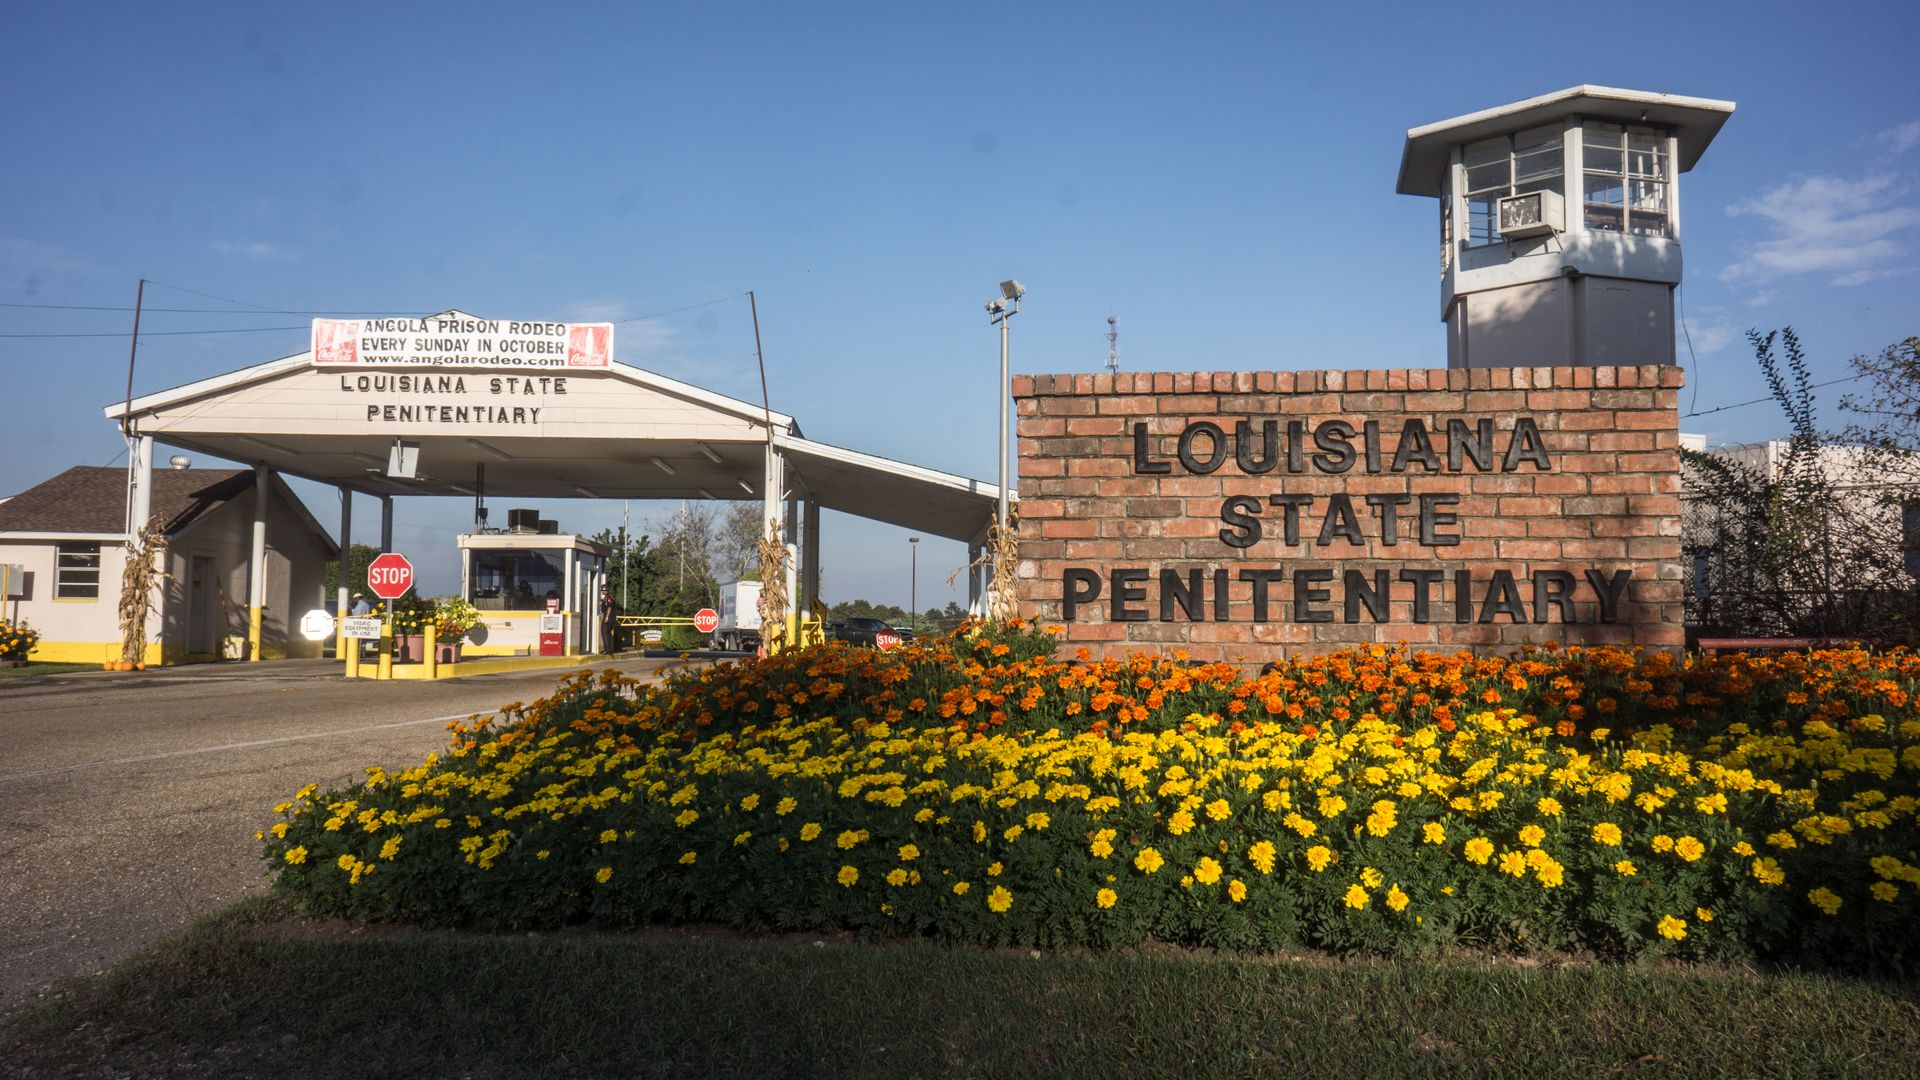 Photo of the entrance to the Louisiana State Penitentiary, which has a brick sign and flowers